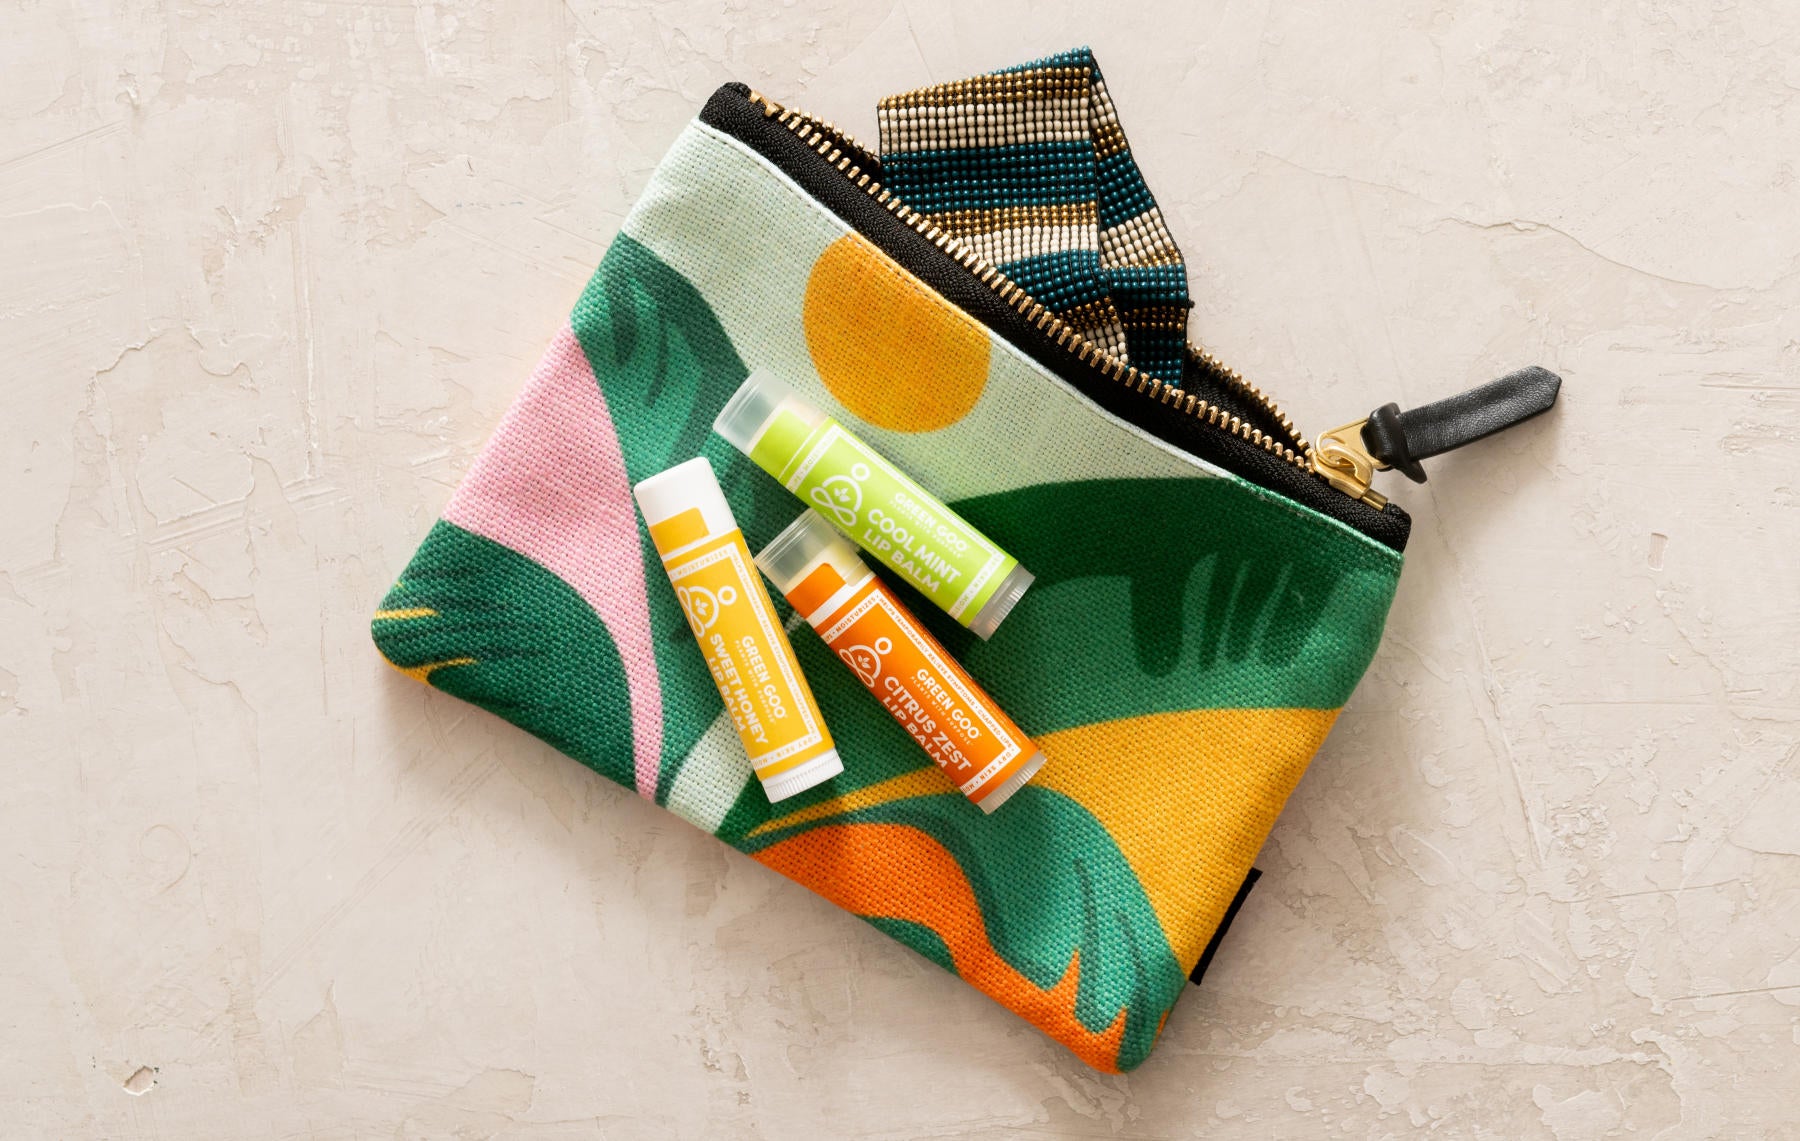 Green Goo's Citrus Zest, Cool Mint, and Sweet Honey lip balms laying on a tropically floral makeup pouch